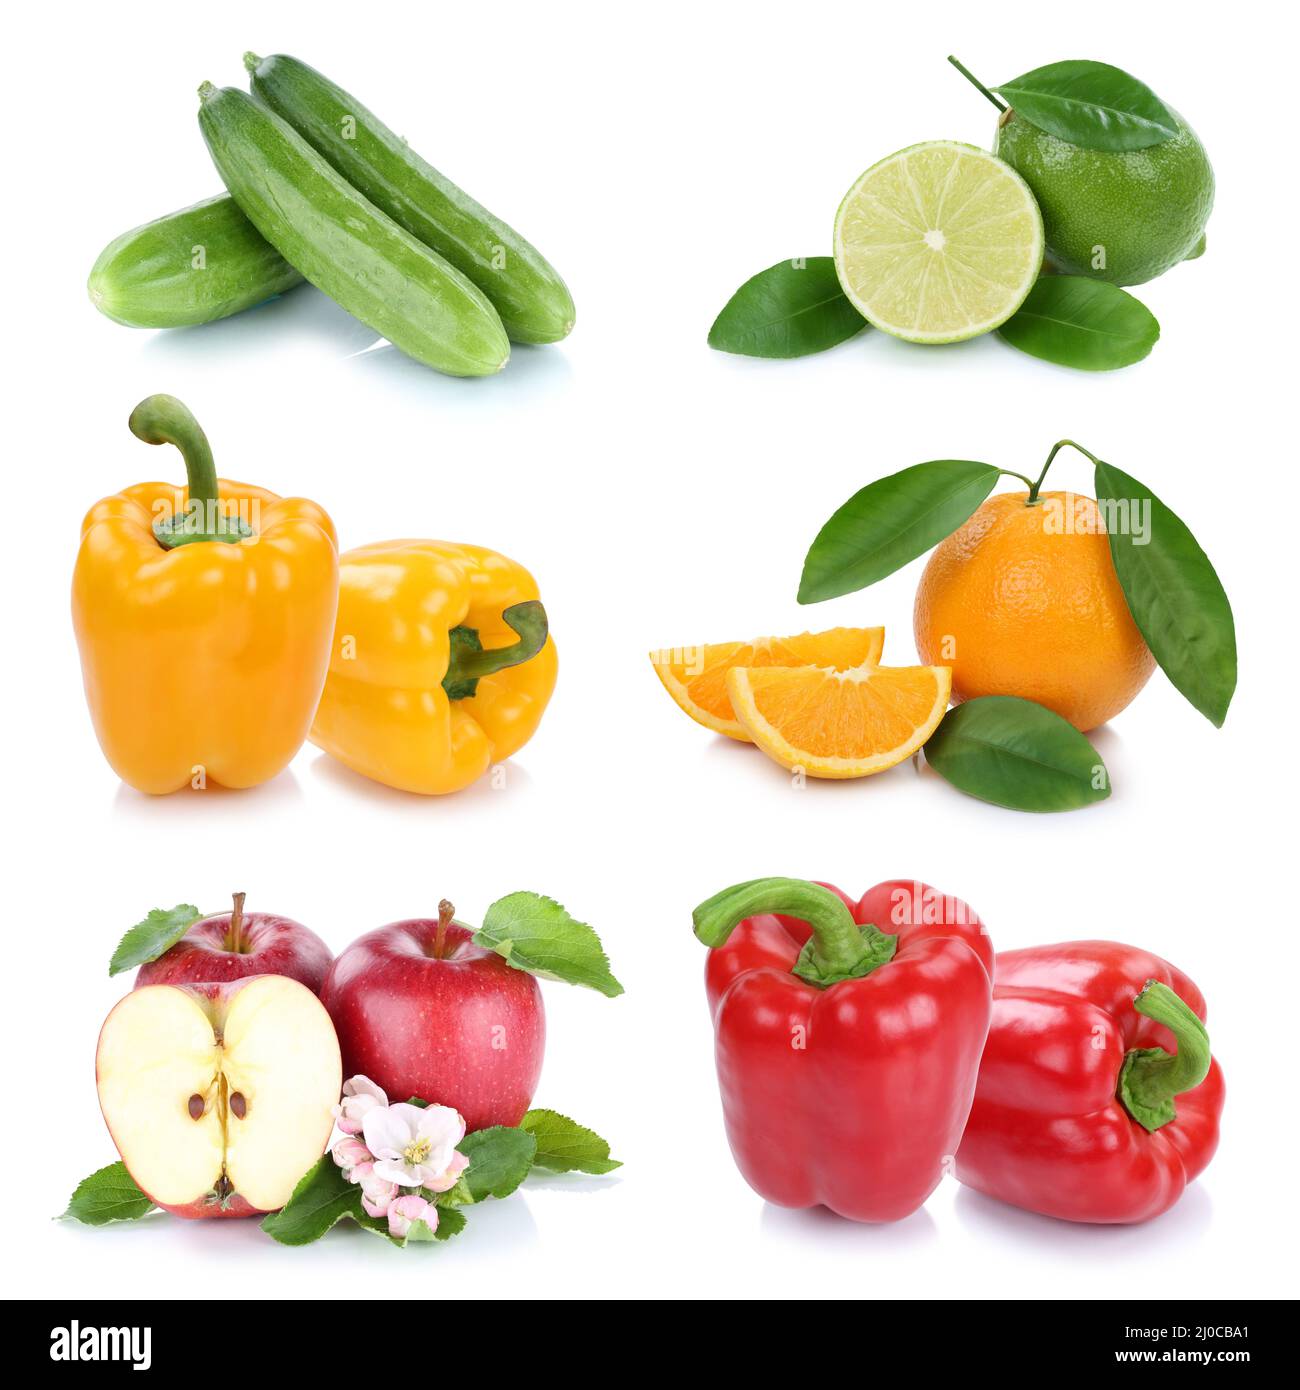 Fruits and vegetables fruits colors fresh collage clippings Stock Photo